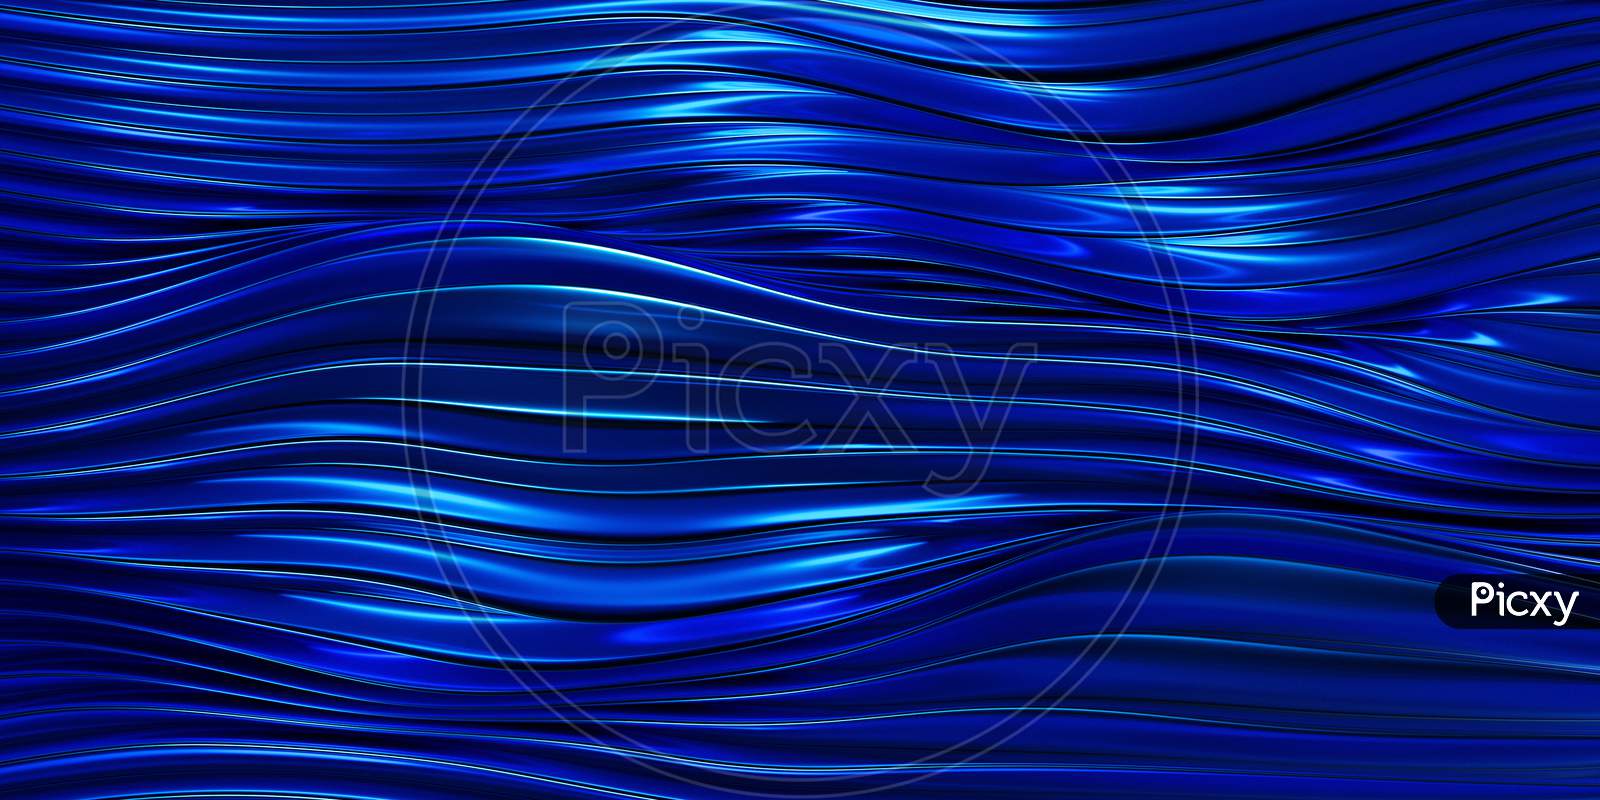 3D Illustration Of Rows  Blue  Portal, Cave .Shape Pattern. Technology Geometry  Background.